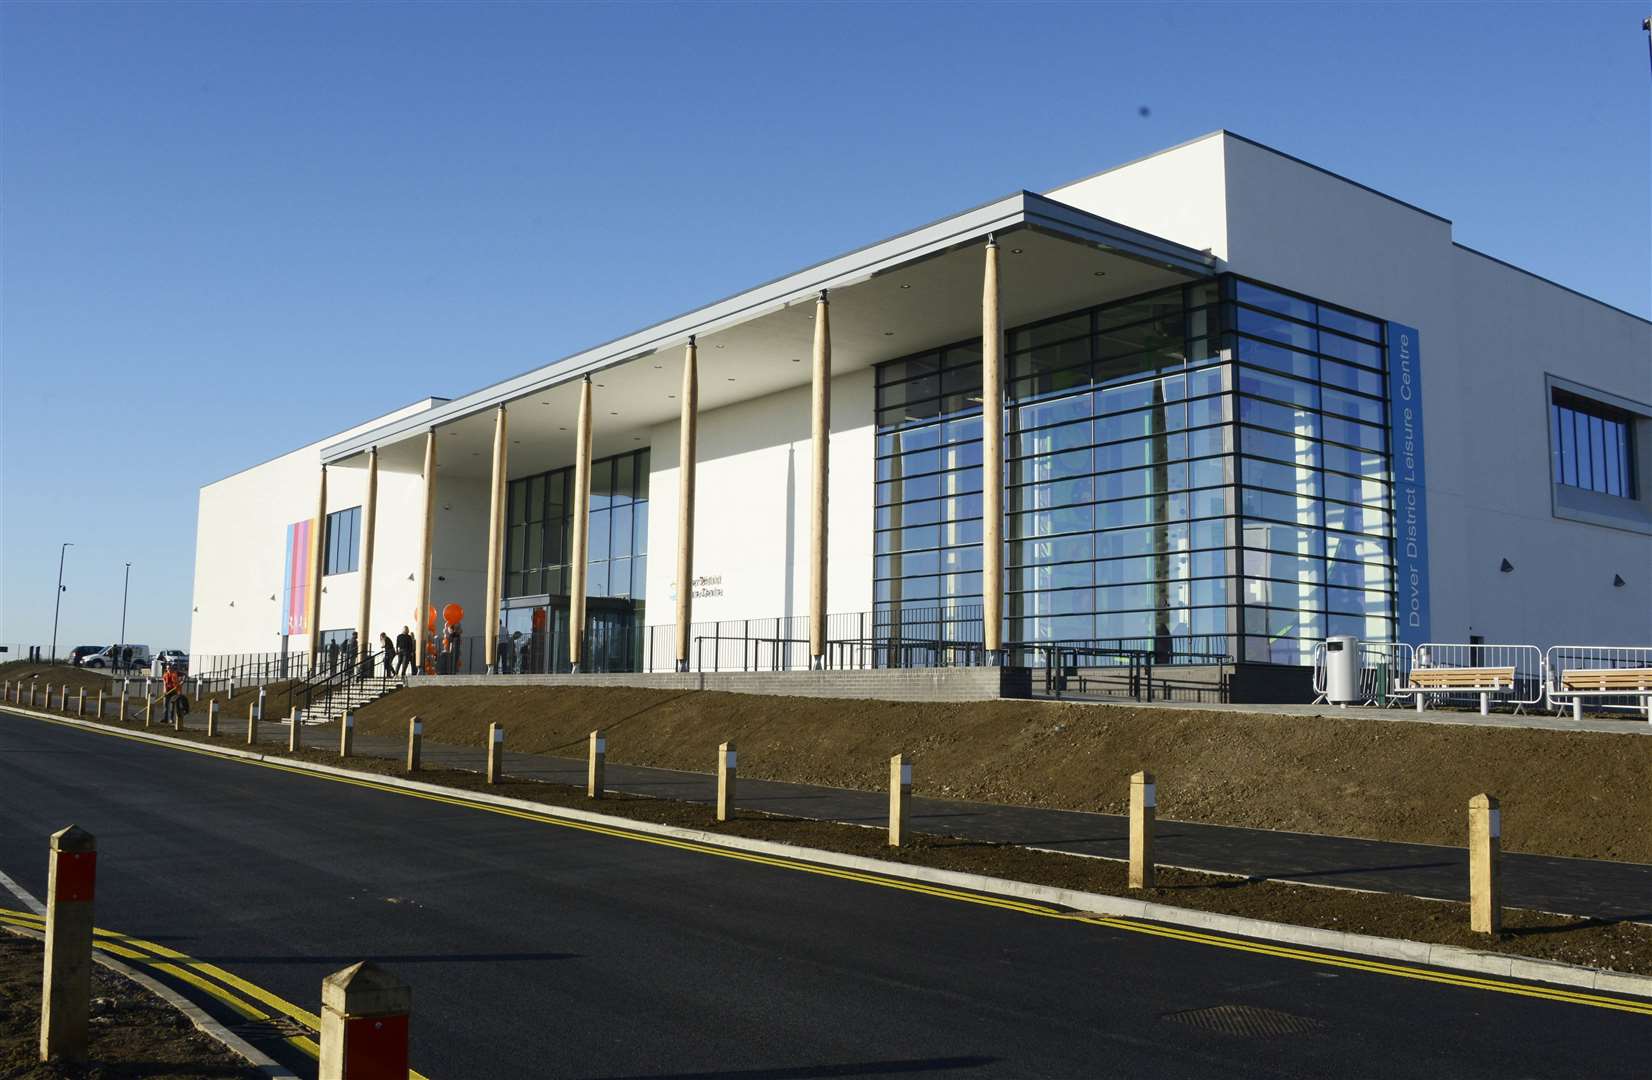 The emergency happened at the new Dover Leisure Centre